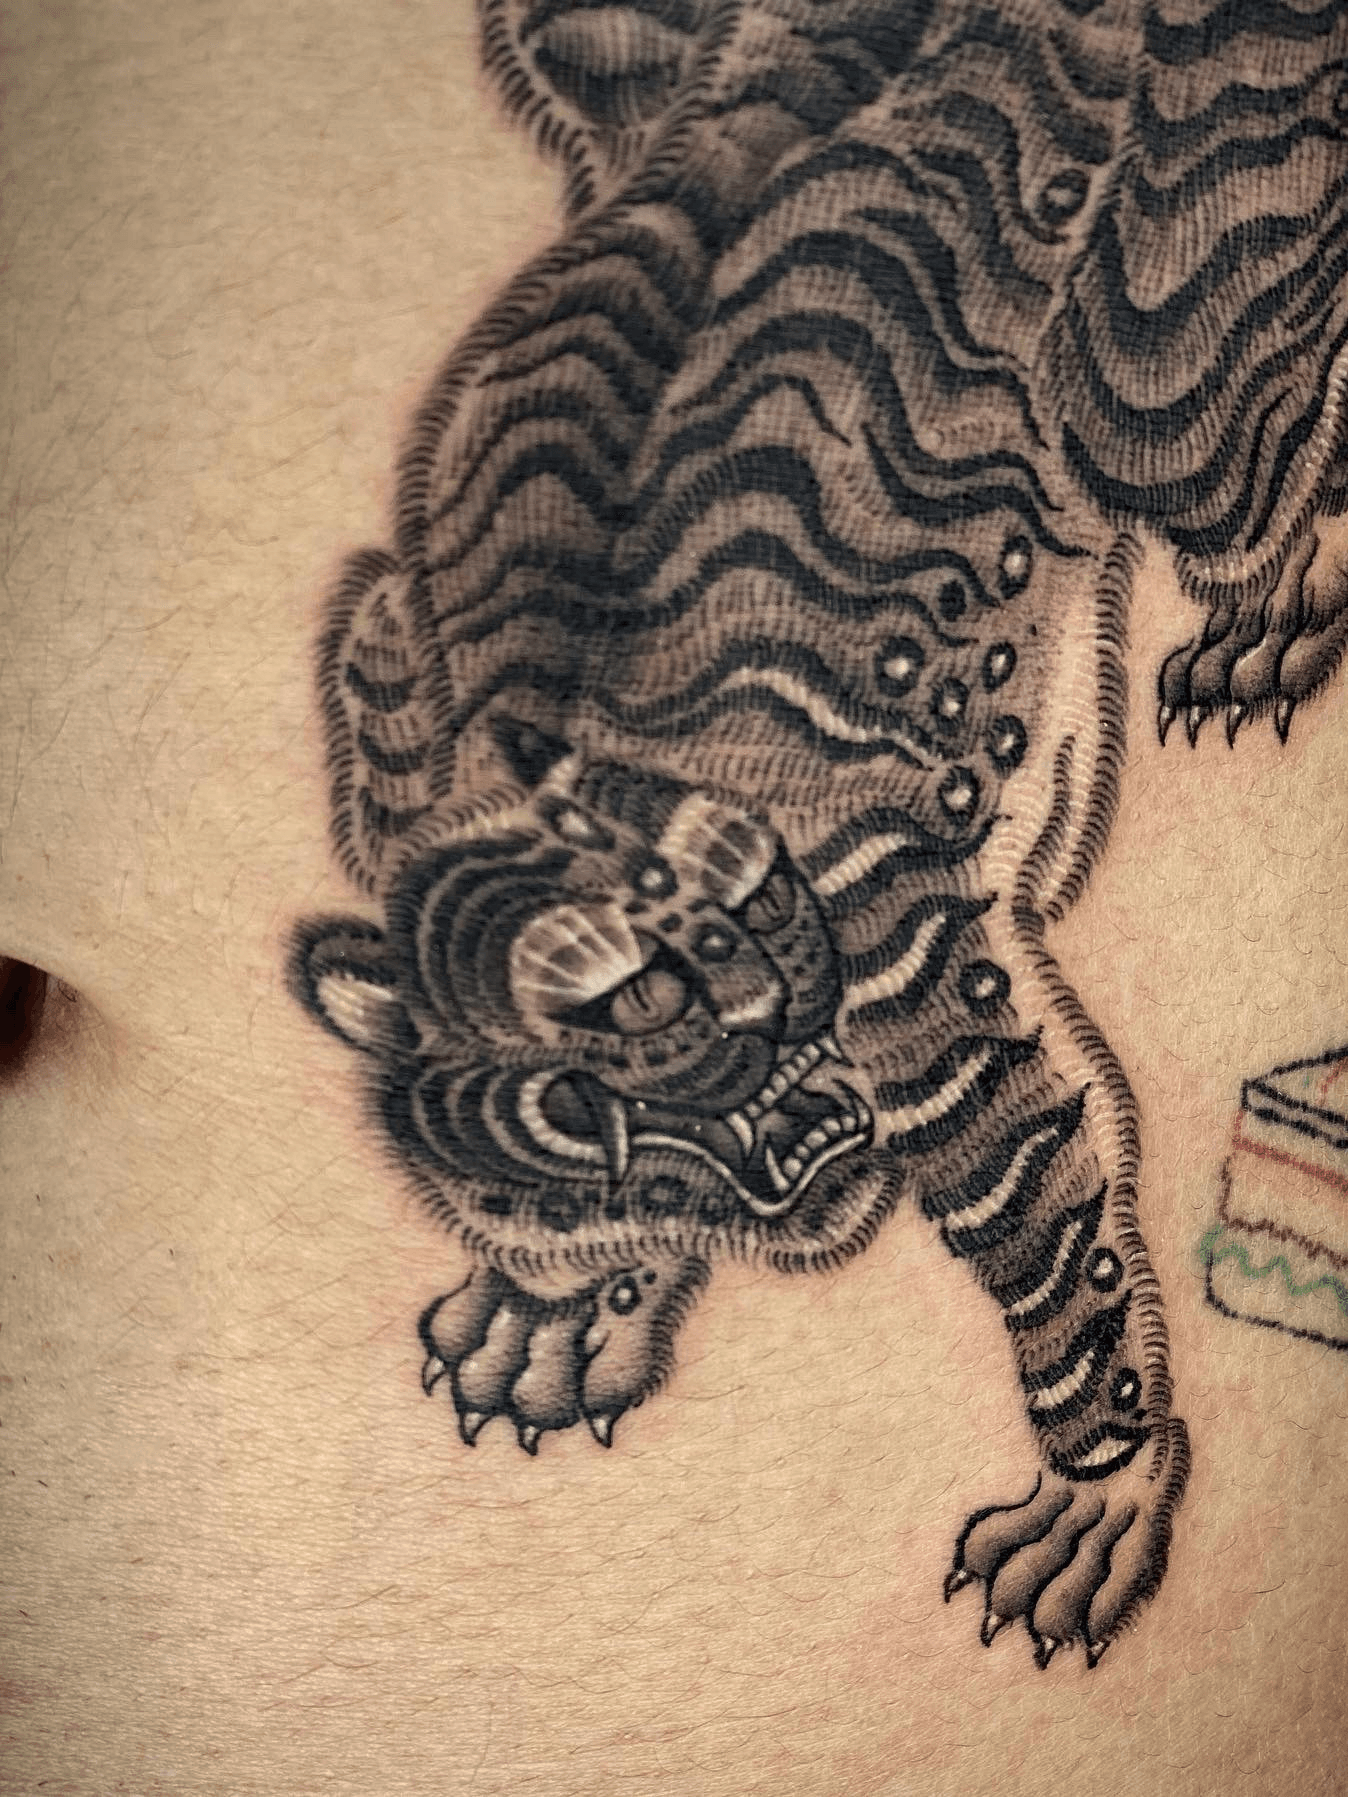 Traditional Korean tiger done beautifully by Liam at Bebop Ink in  Vancouver An extremely meaningful piece to represent my heritage  r tattoos